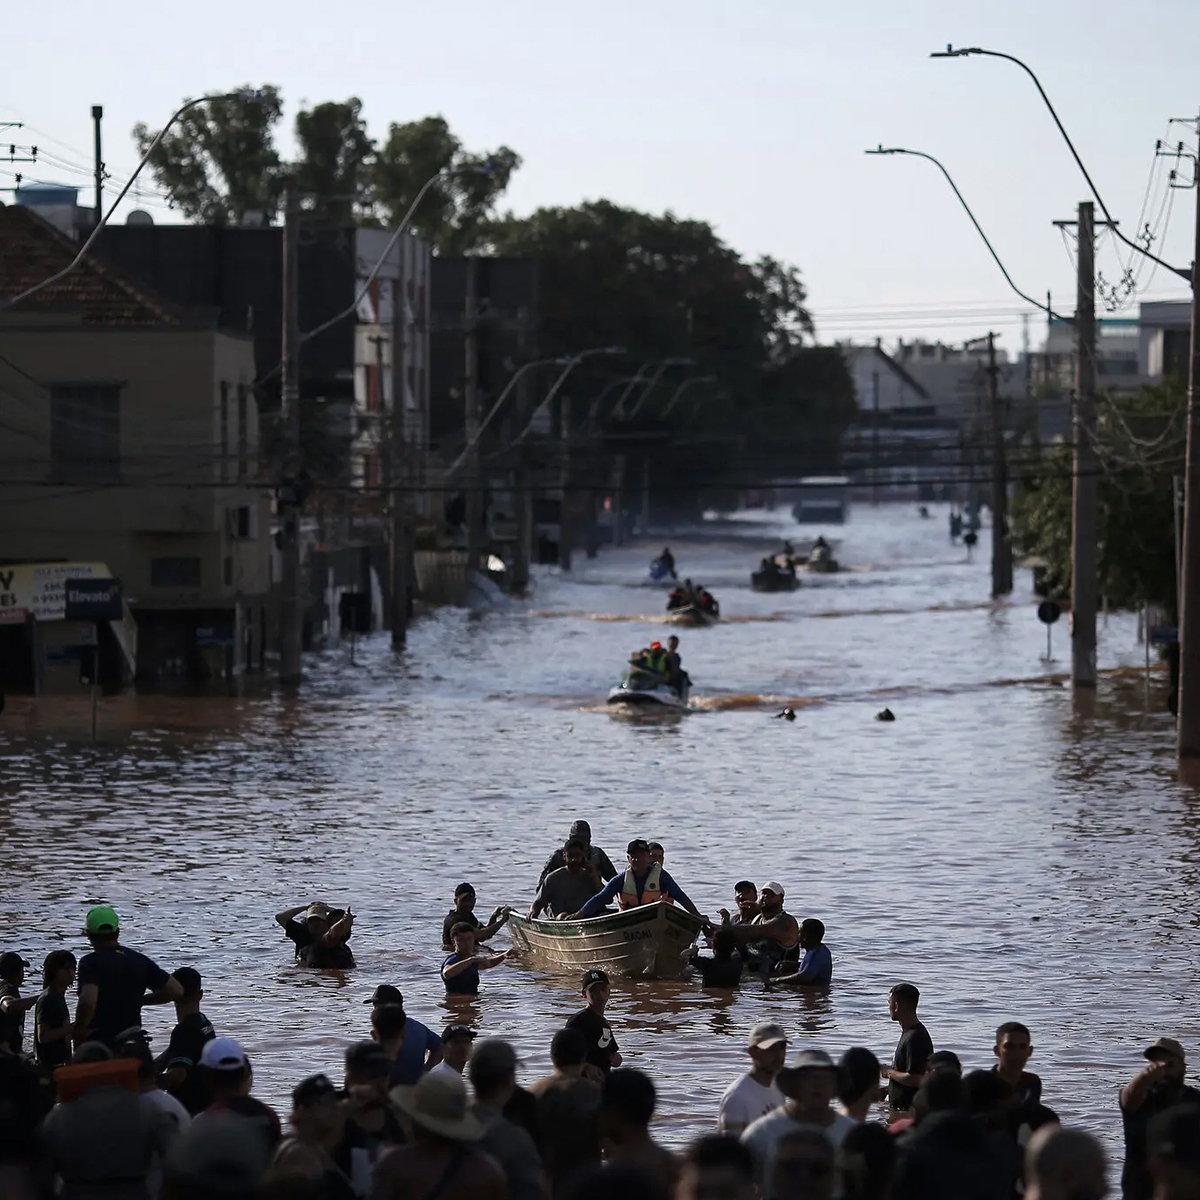 Facing the worst flooding in recent memory, Rio Grande do Sul is in urgent need of support and relief. Nearly 1.5 million people have been affected by the disaster, including at least 105 people who have lost their lives, another 130 still missing, and over 230,000 displaced from